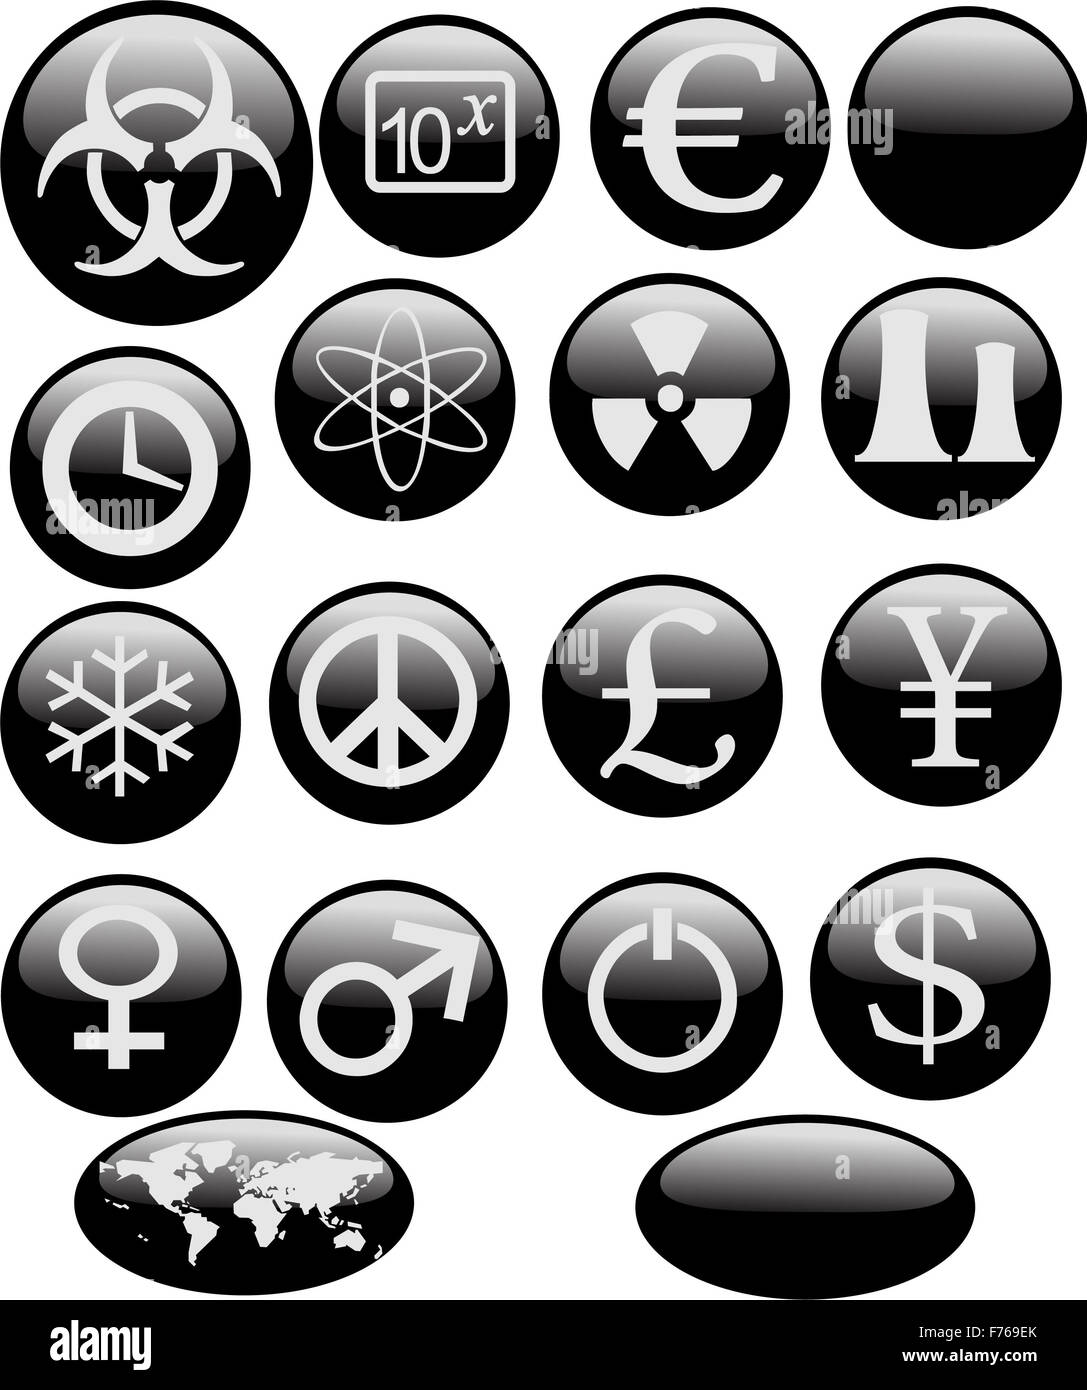 a set of icons related to science/chemistry physics Stock Photo